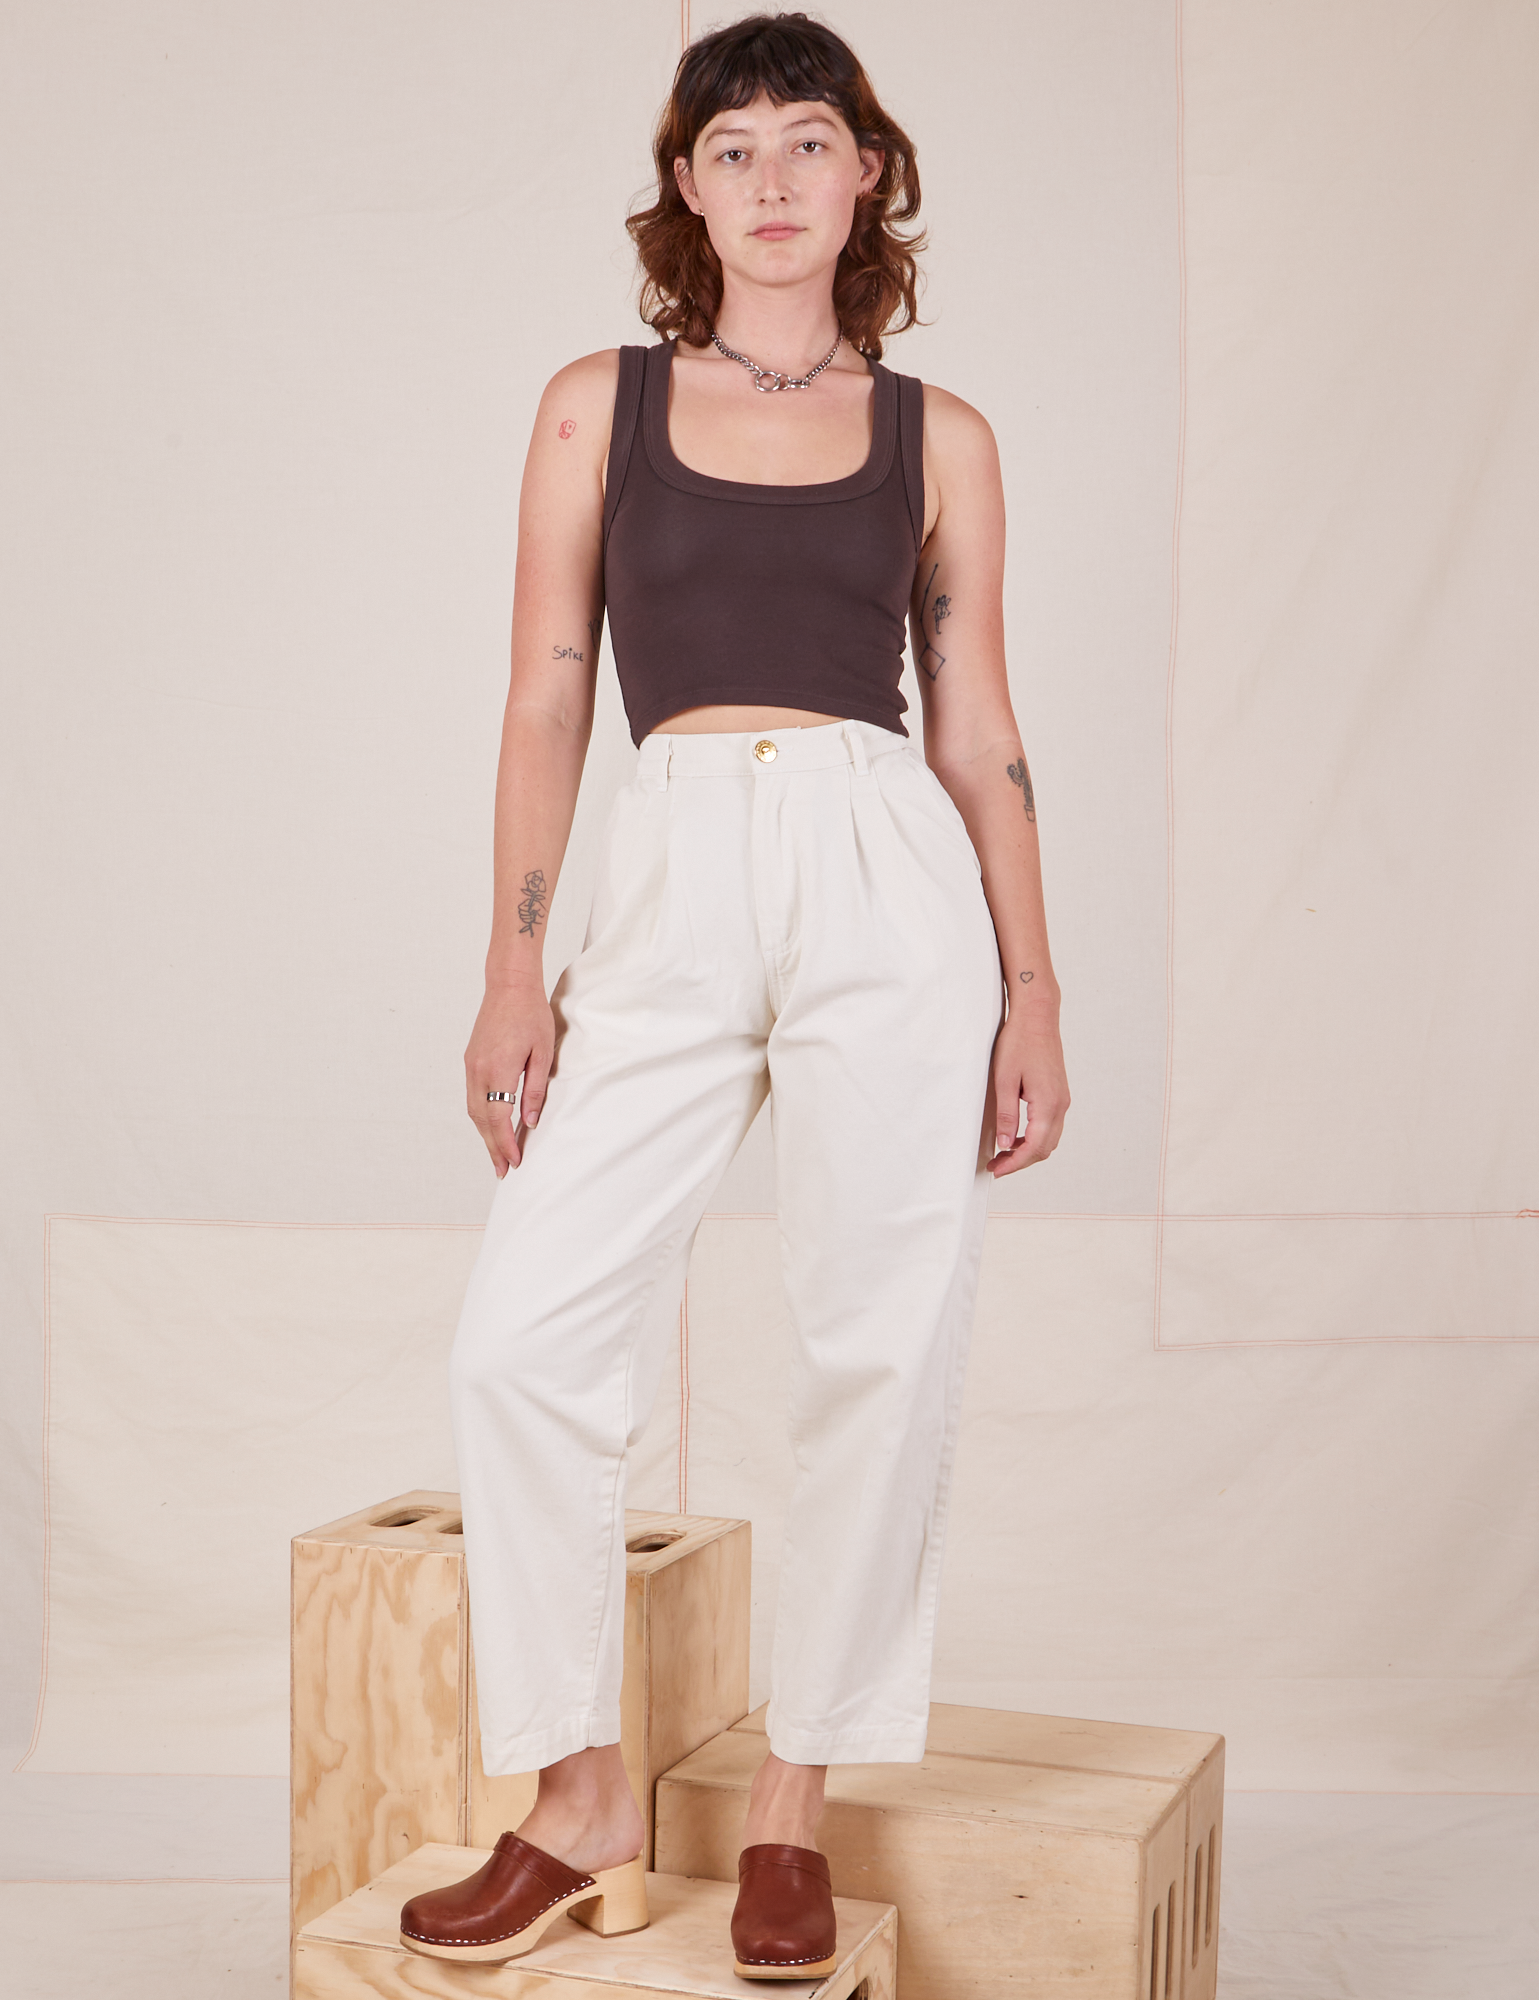 Alex is wearing Heavyweight Trousers in Vintage Tee Off-White and espresso brown Cropped Tank Top.